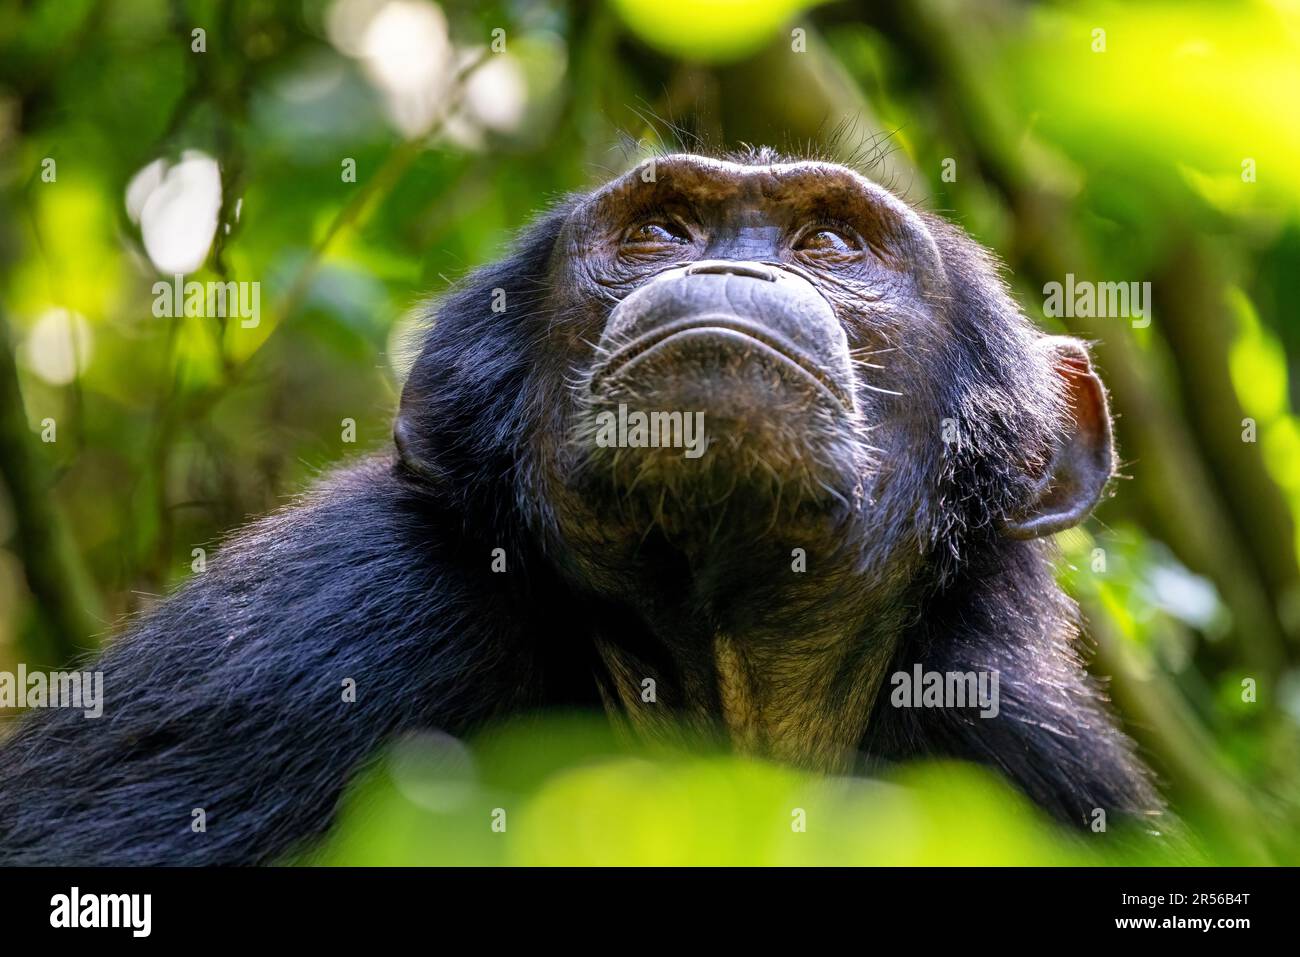 Adult chimpanzee, pan troglodytes, looks up to the sun shining through a break in the tree canopy. Kibale Forest, Uganda. Conservation program means t Stock Photo